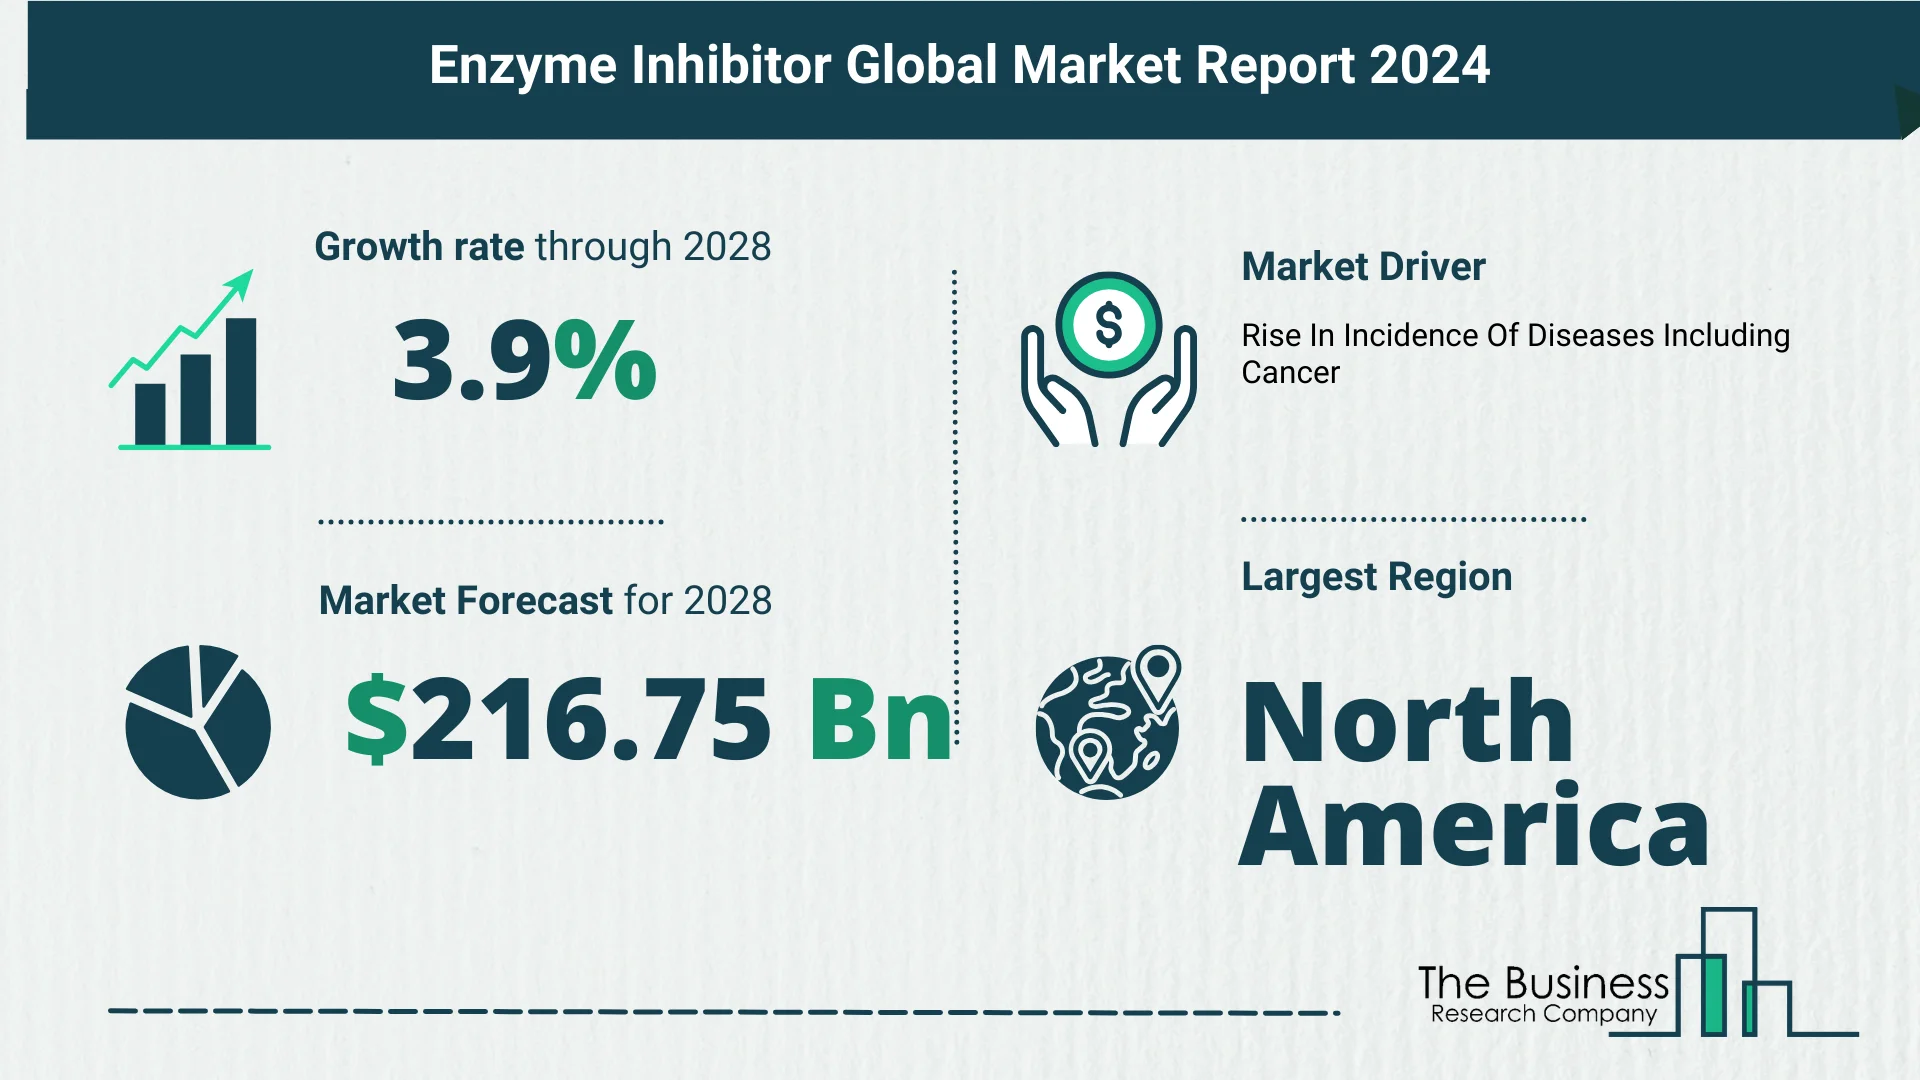 Enzyme Inhibitor Market Report 2024: Market Size, Drivers, And Trends